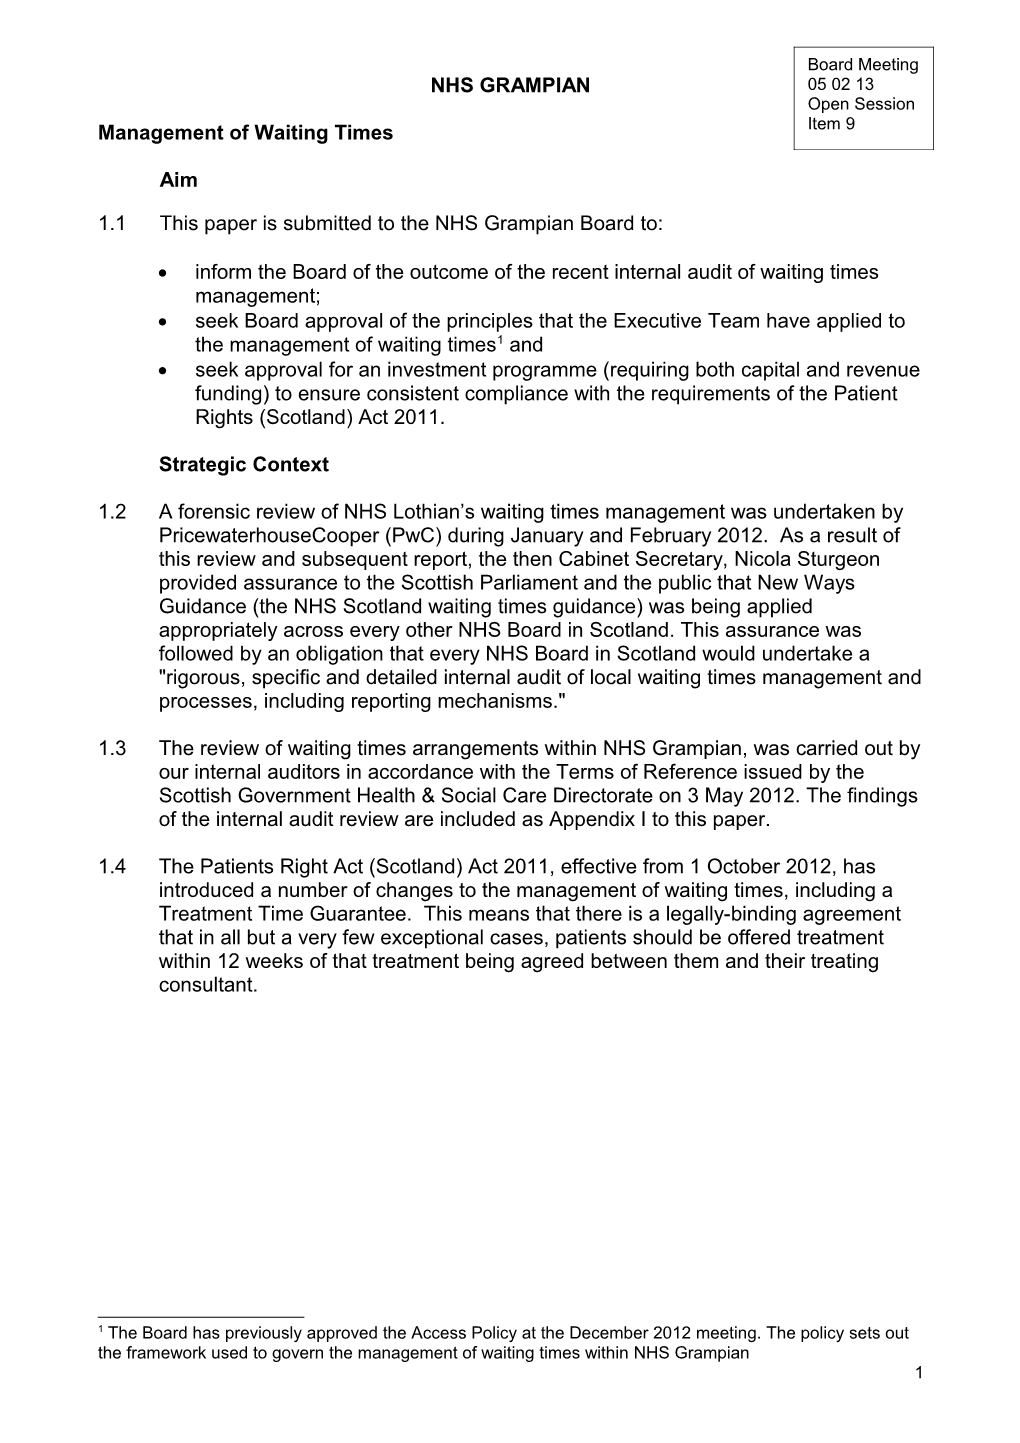 Item 9 for 5 Feb 13 Management of Waiting Lists Cover Paper